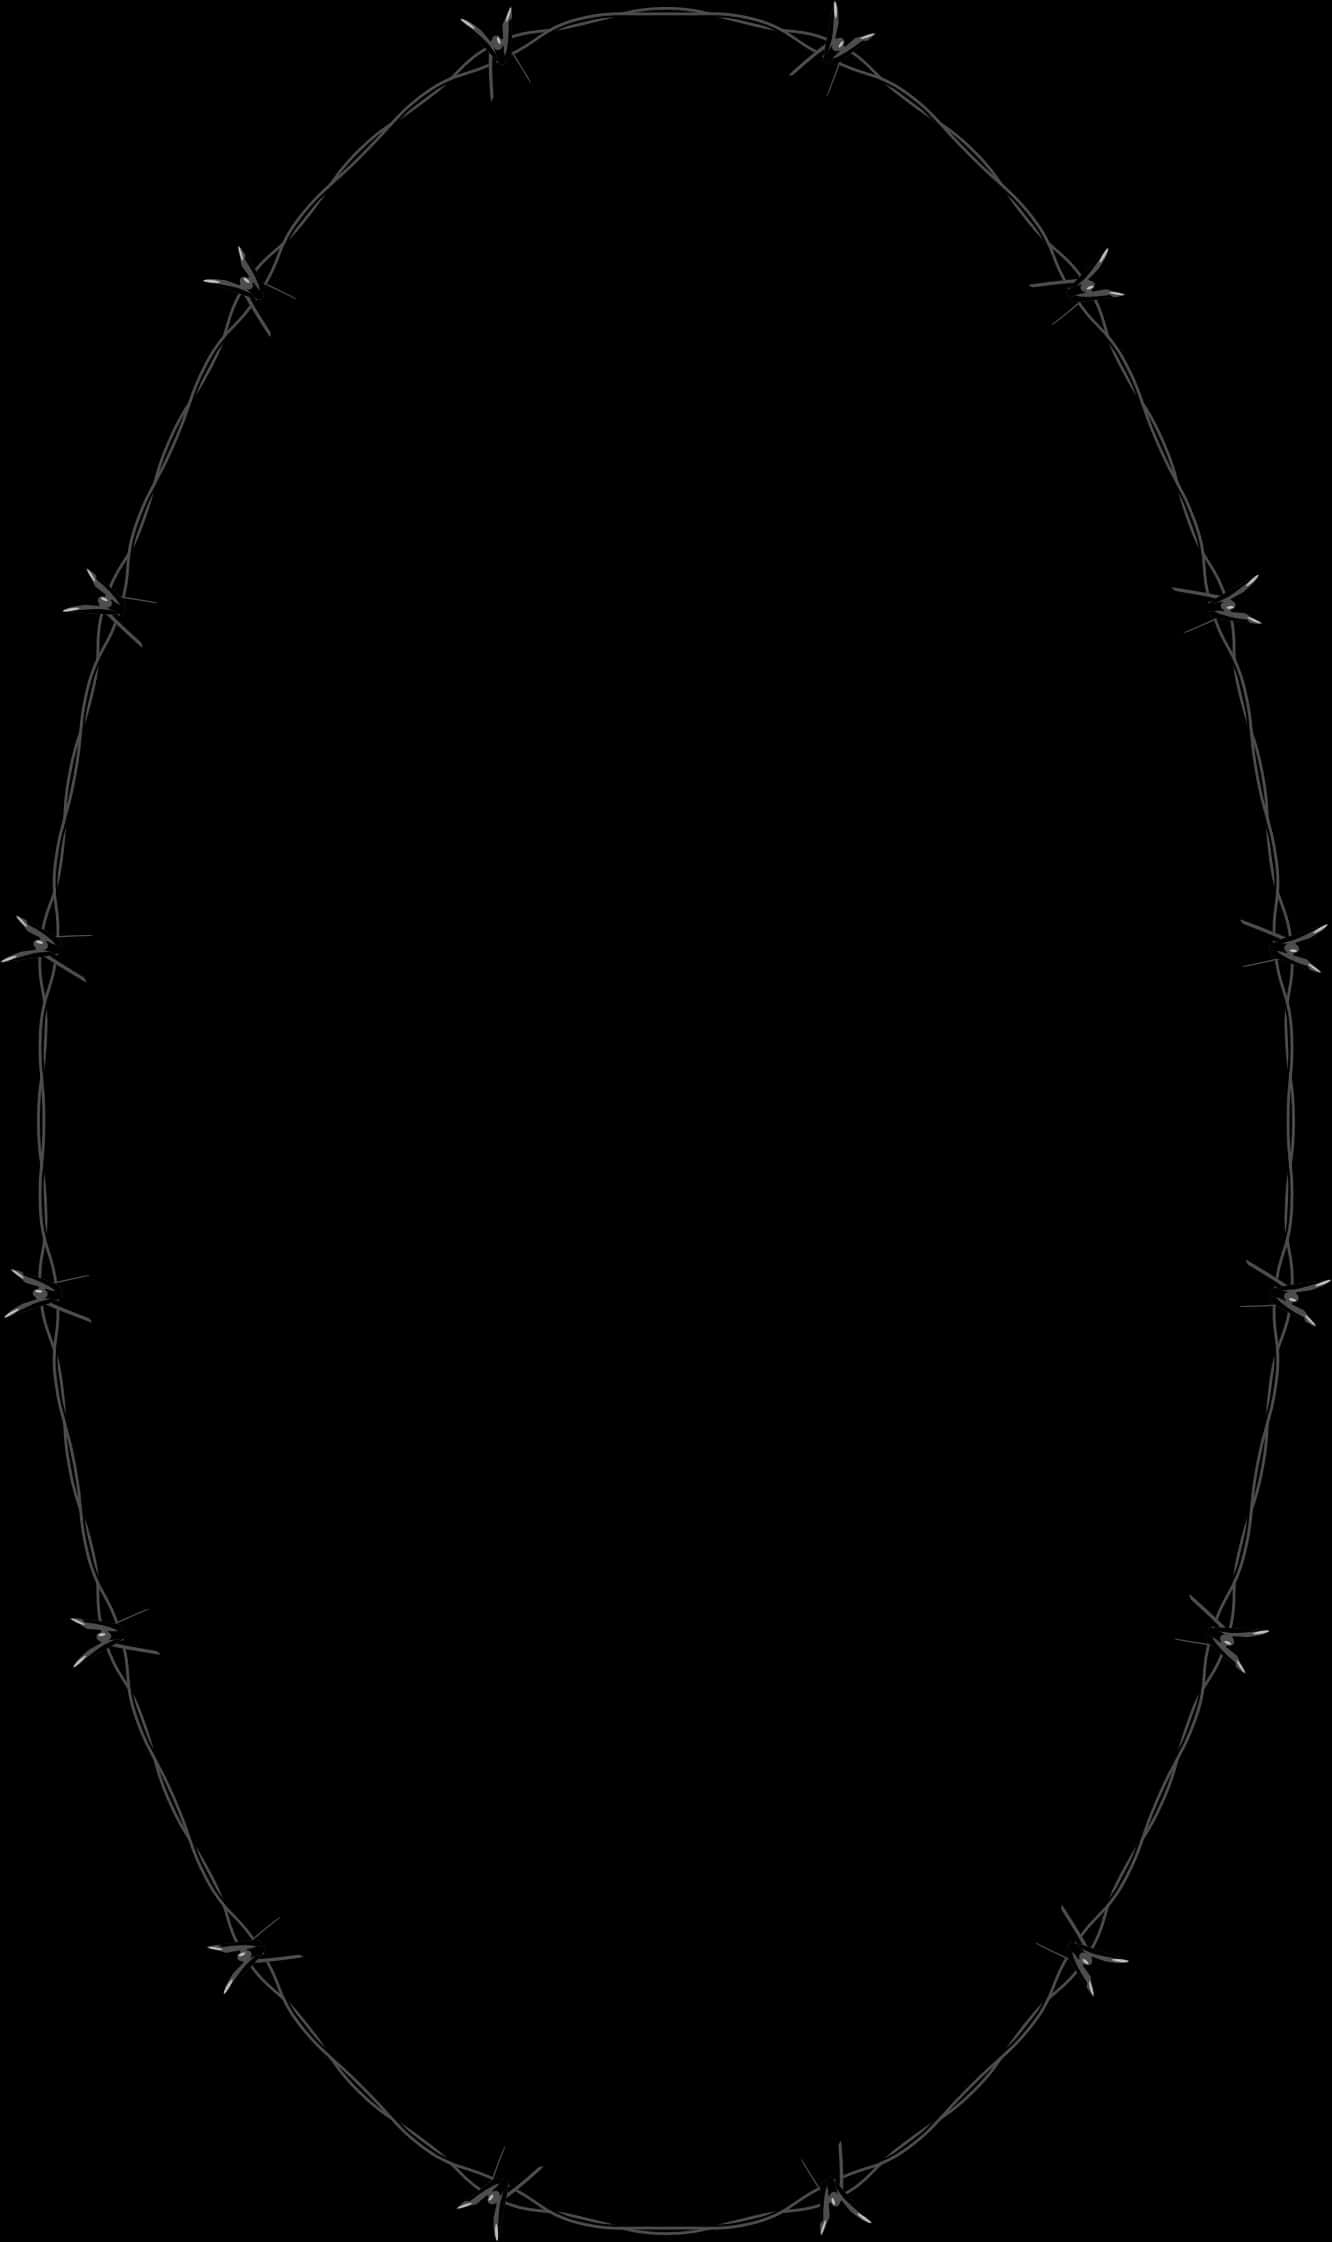 Barbed Wire Oval Frame PNG image